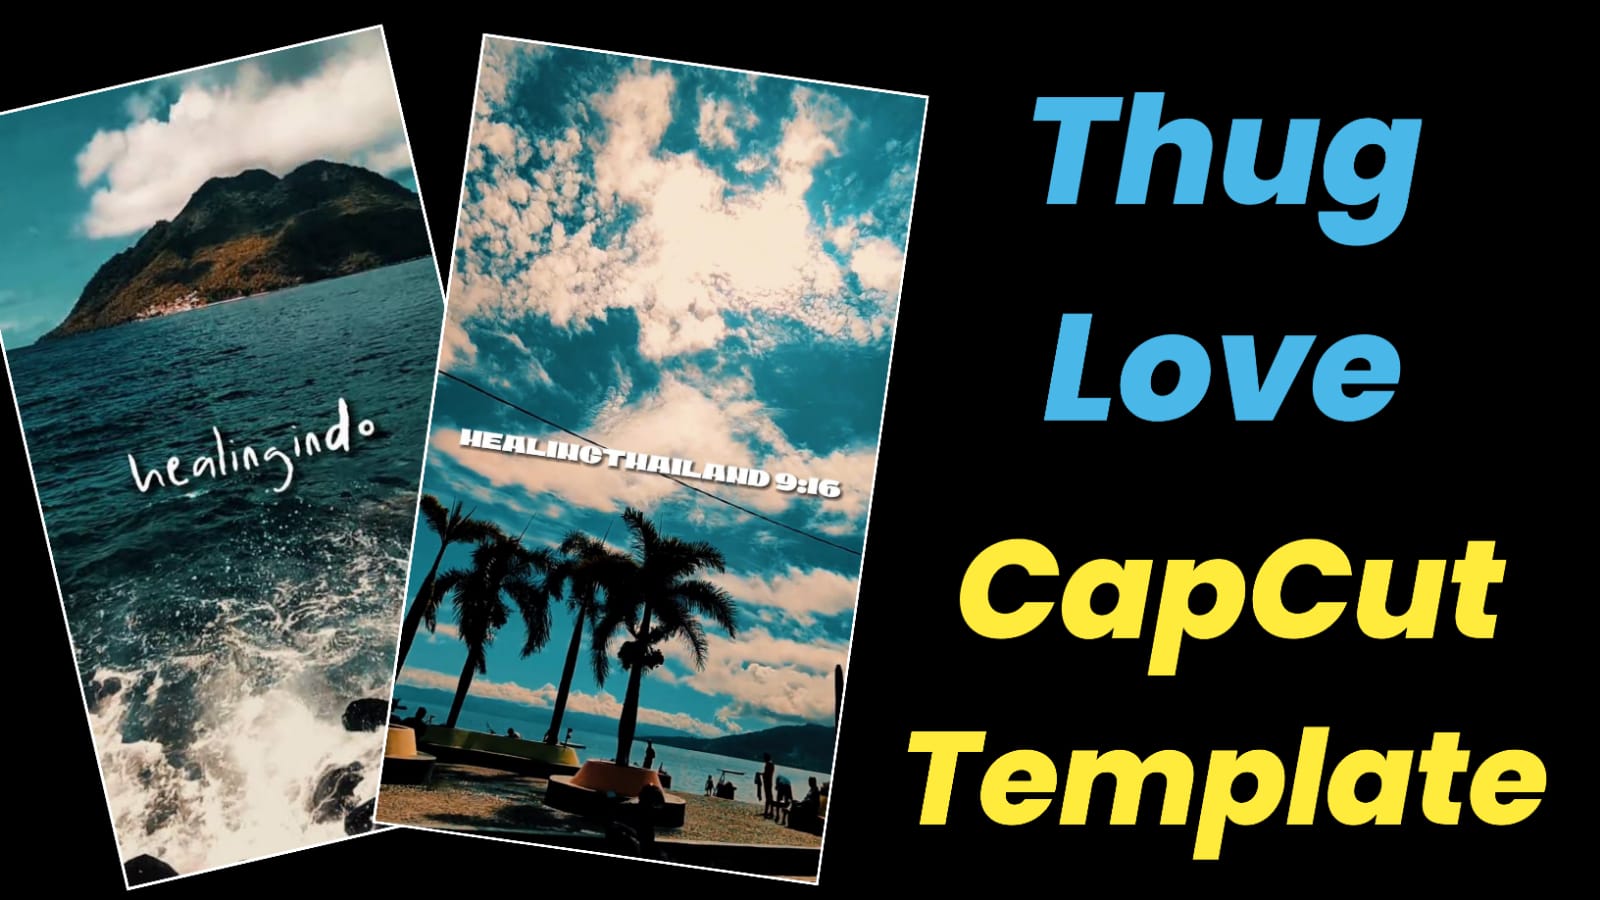 thug-love-capcut-template-with-download-link-trending-capcut-templates